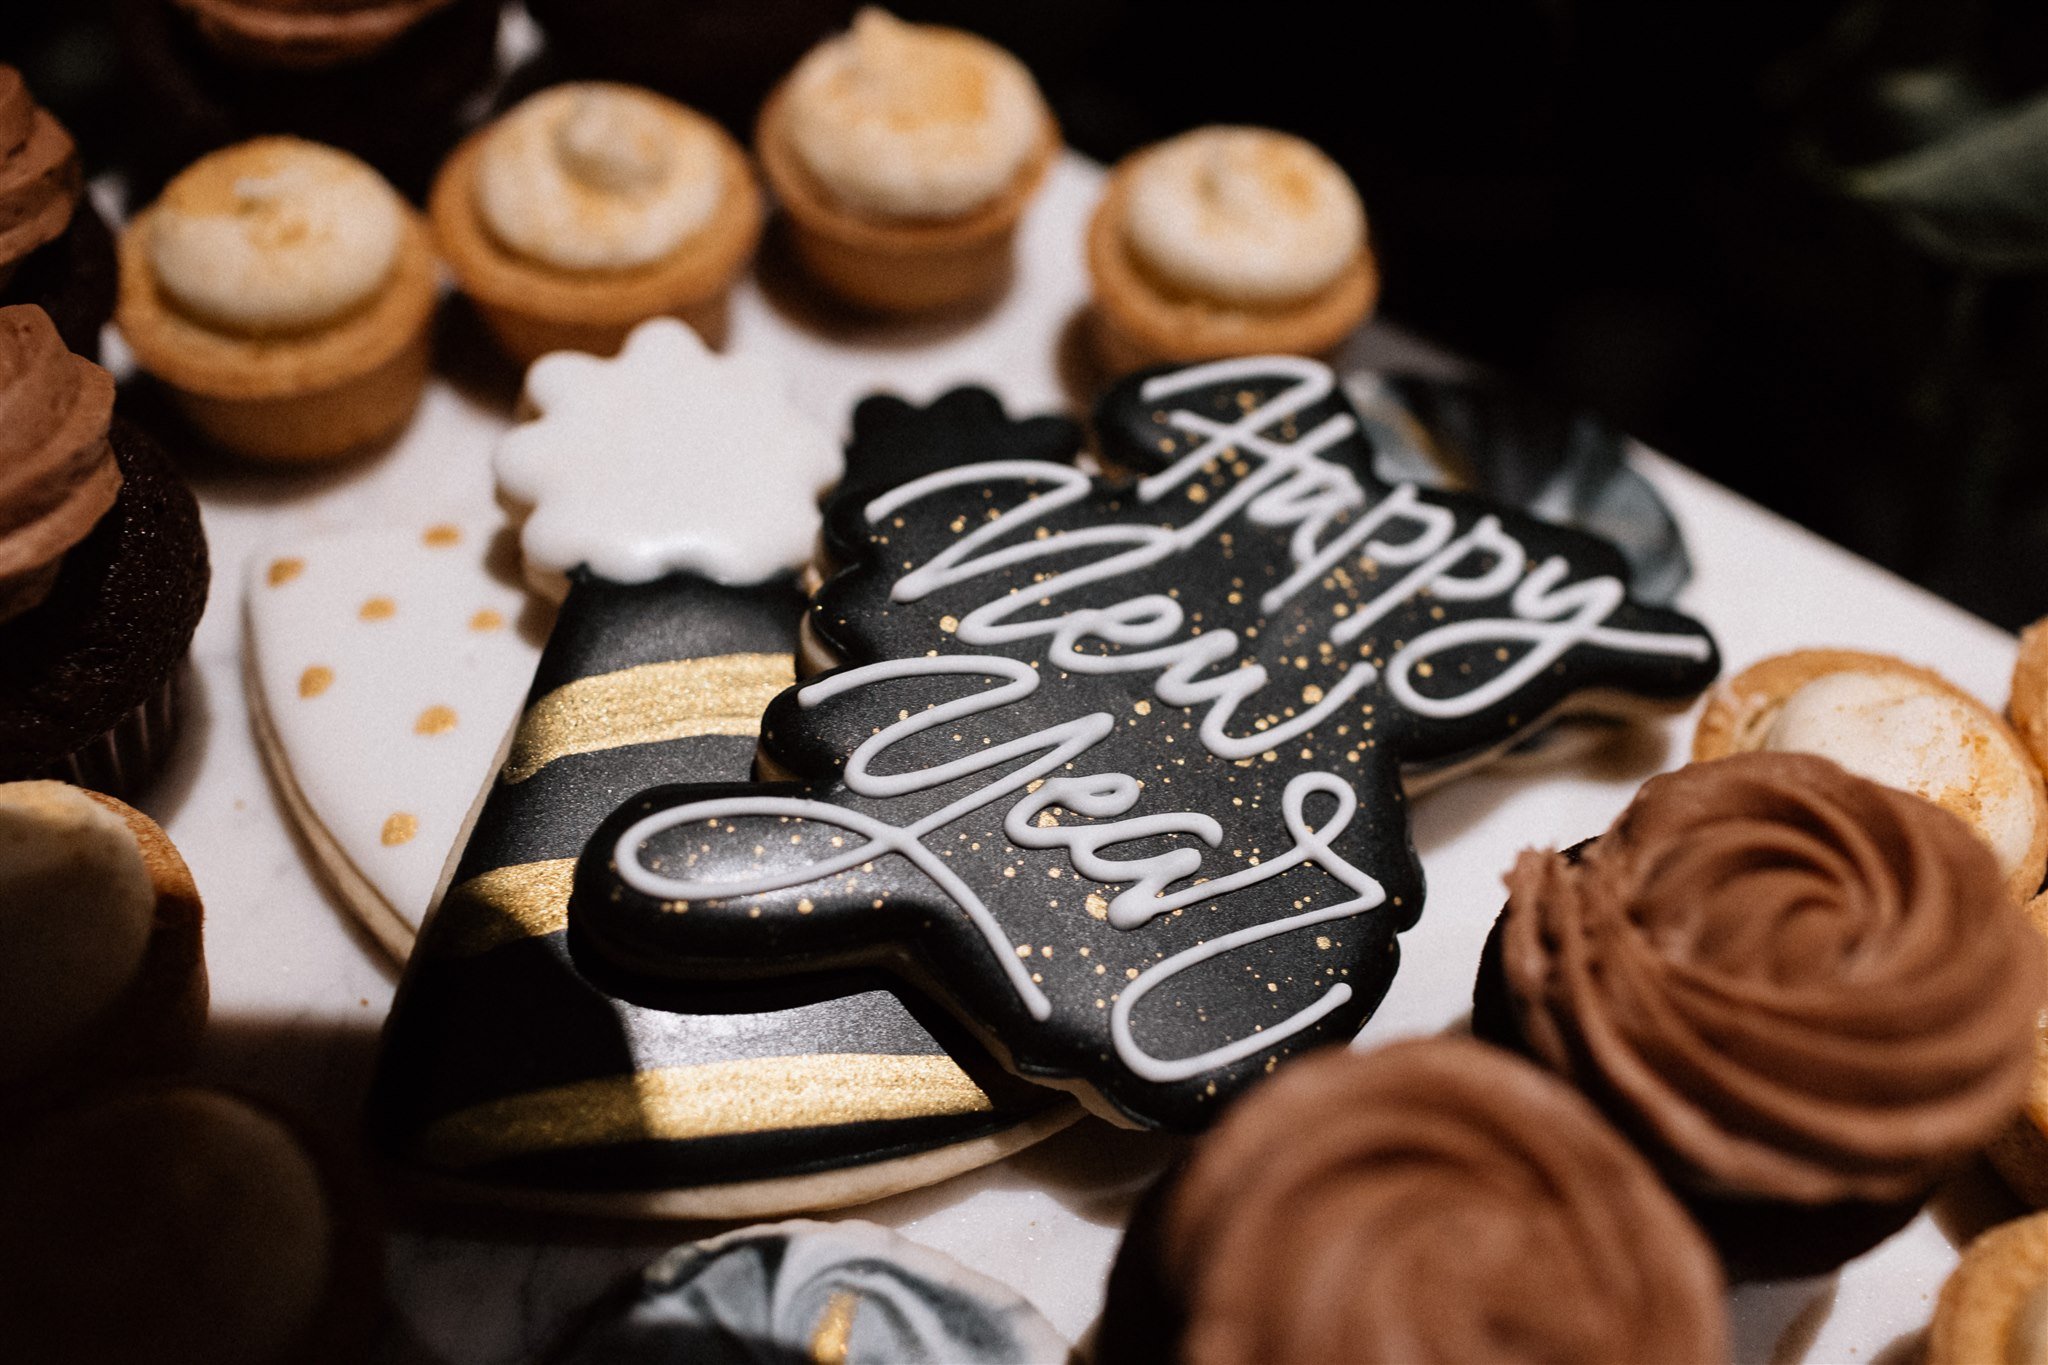  A closeup of a wedding cookie tray; one of the cookies reads “Happy New Year” in royal icing. 